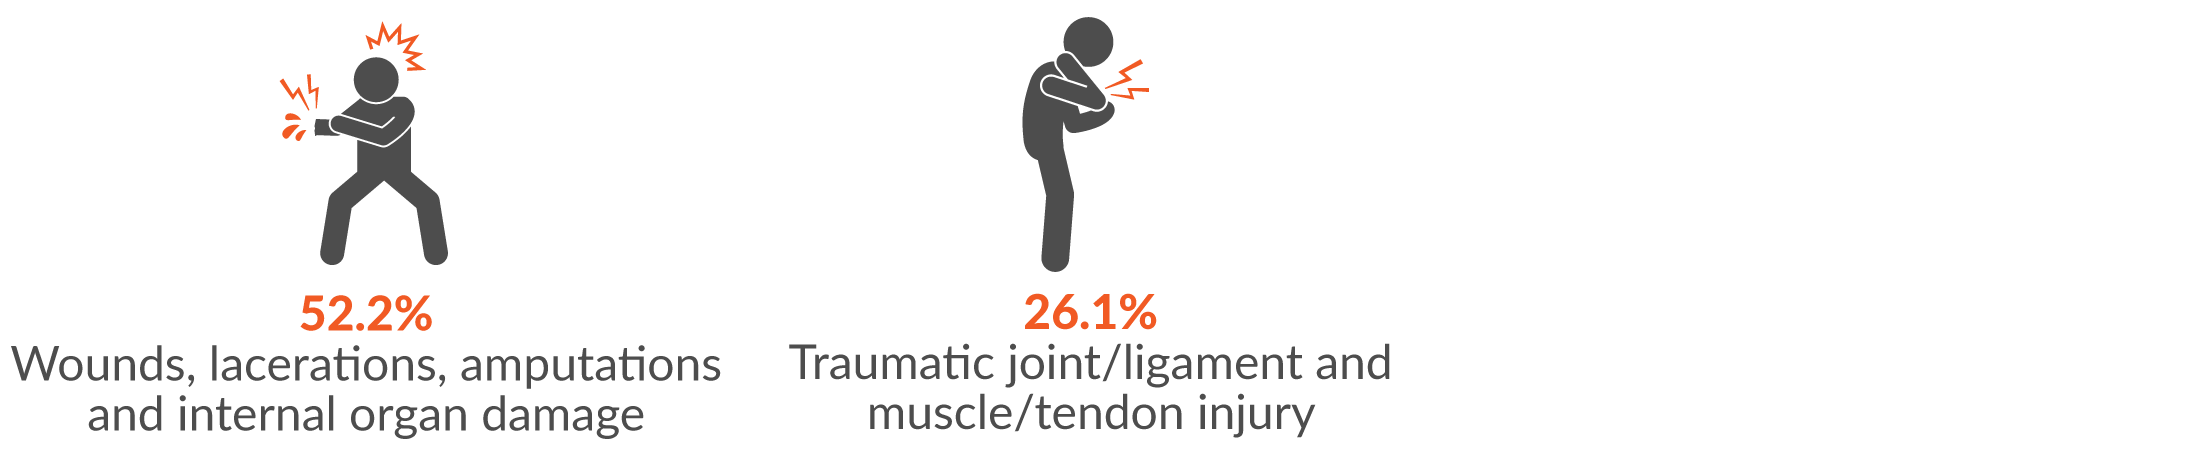 52.2% Wounds, lacerations, amputations and internal organ damage; and 26.1% traumatic joint/ligament and muscle/tendon injury.